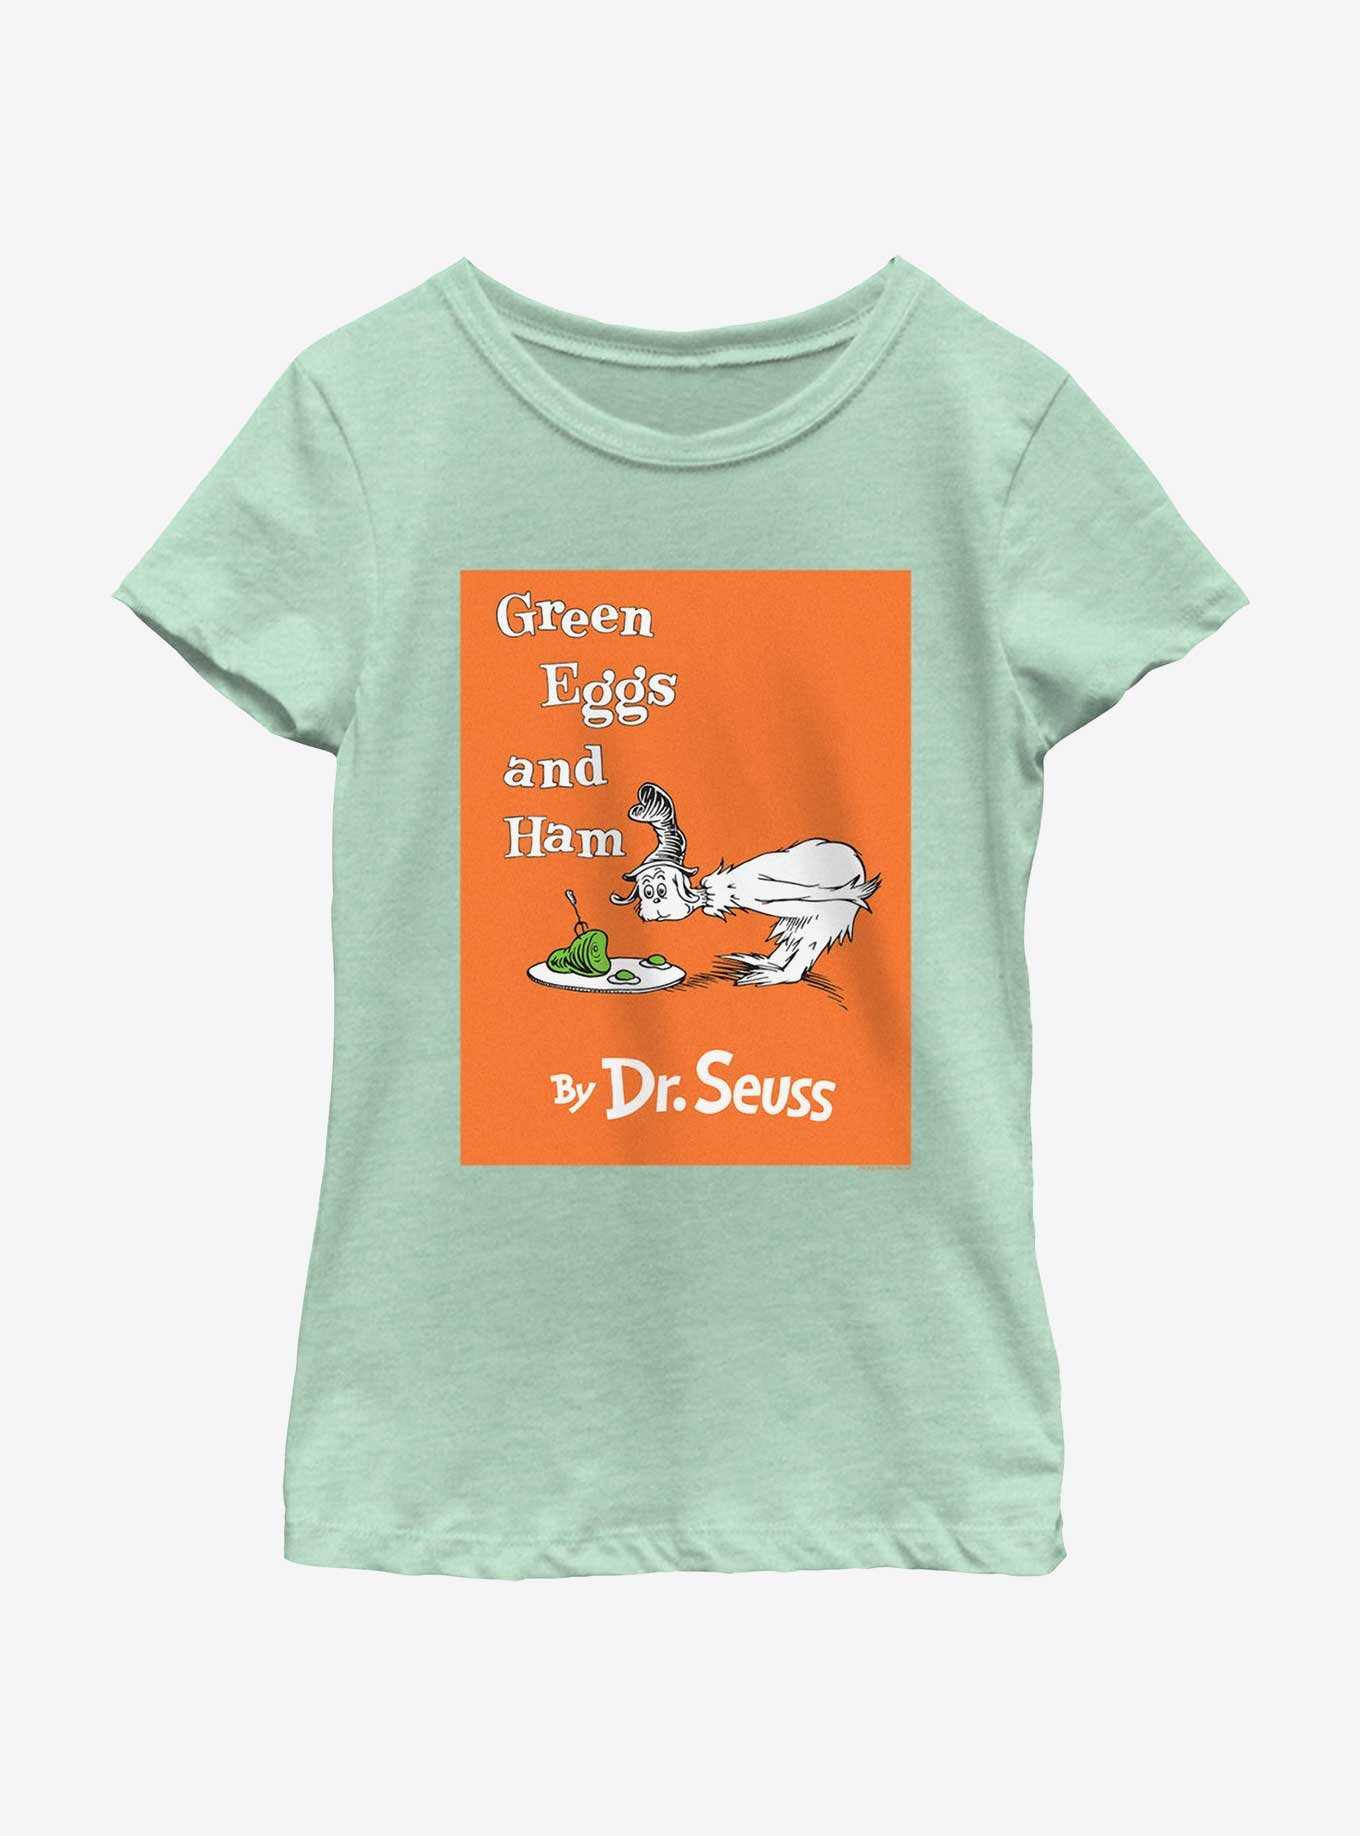 Dr. Seuss Green Eggs and Ham Book Cover Youth Girls T-Shirt, , hi-res